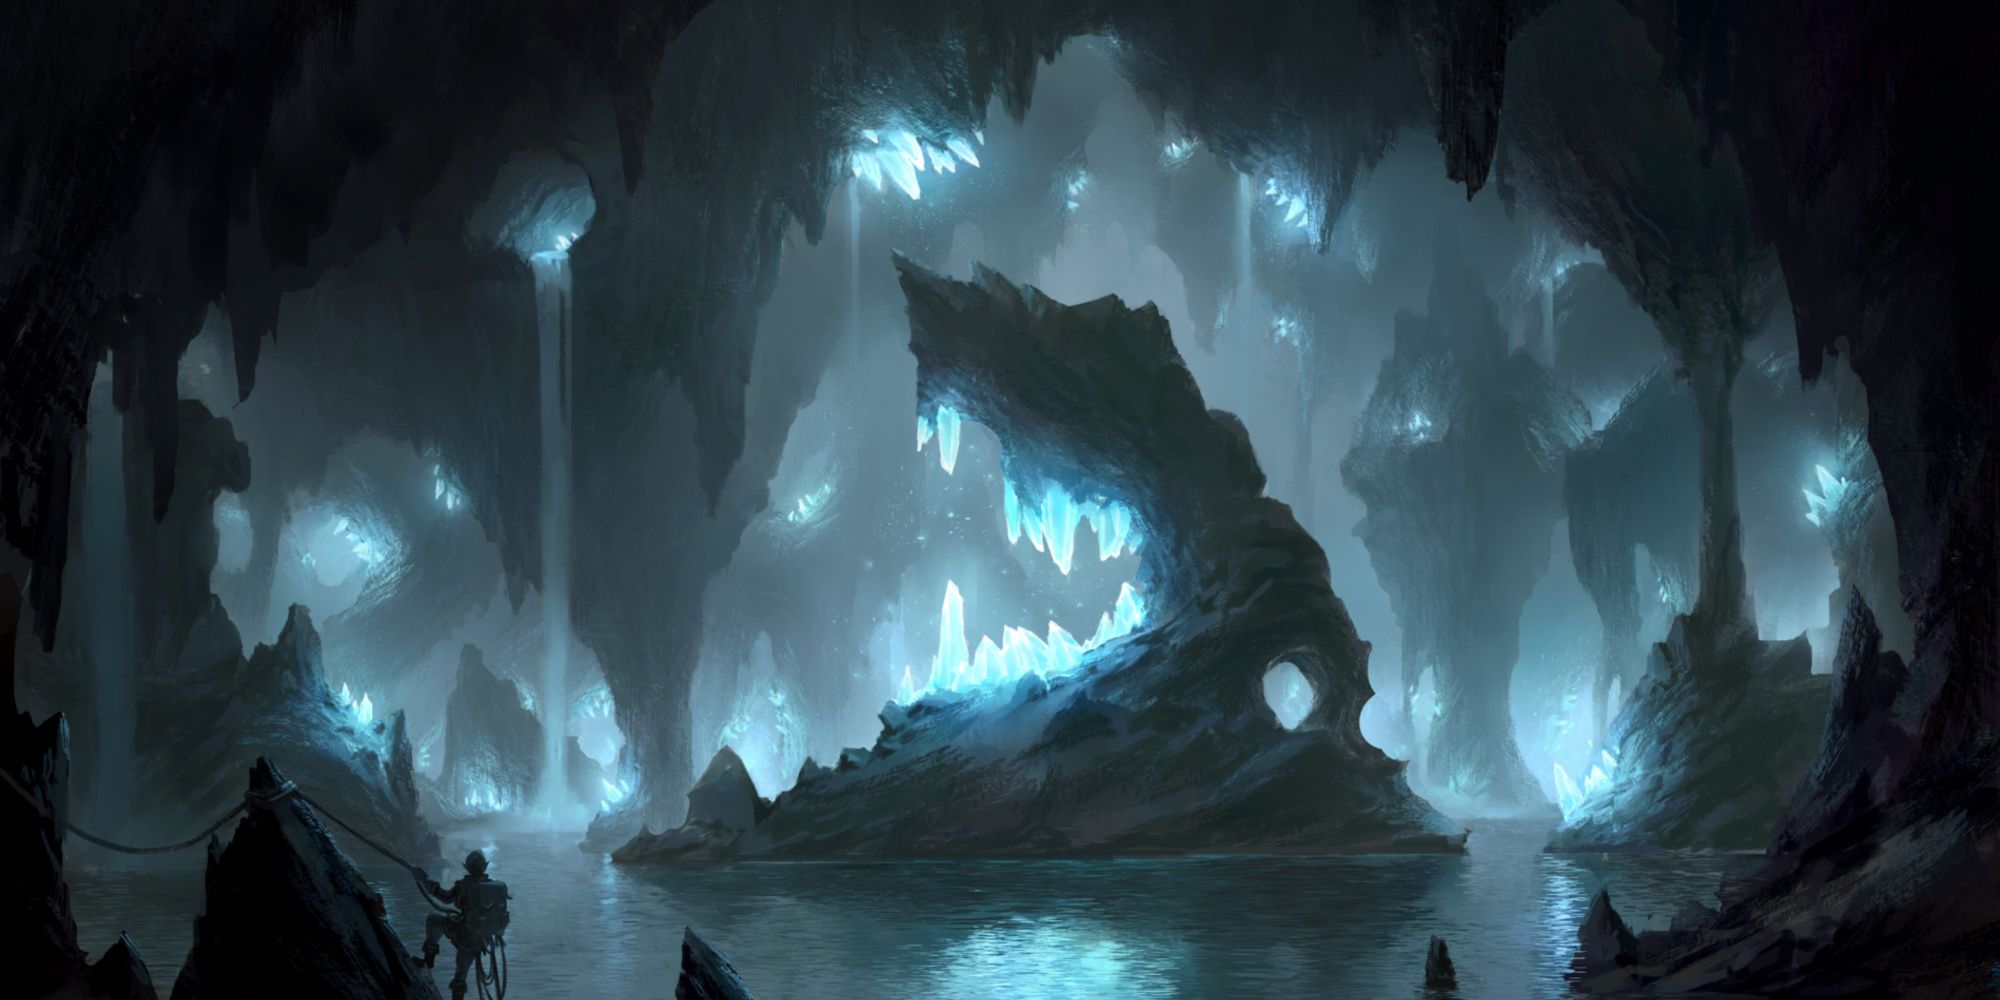 Island by Piotr Dura a crystal cave with an island in the middle of an underground lake crowing many glowing crystals